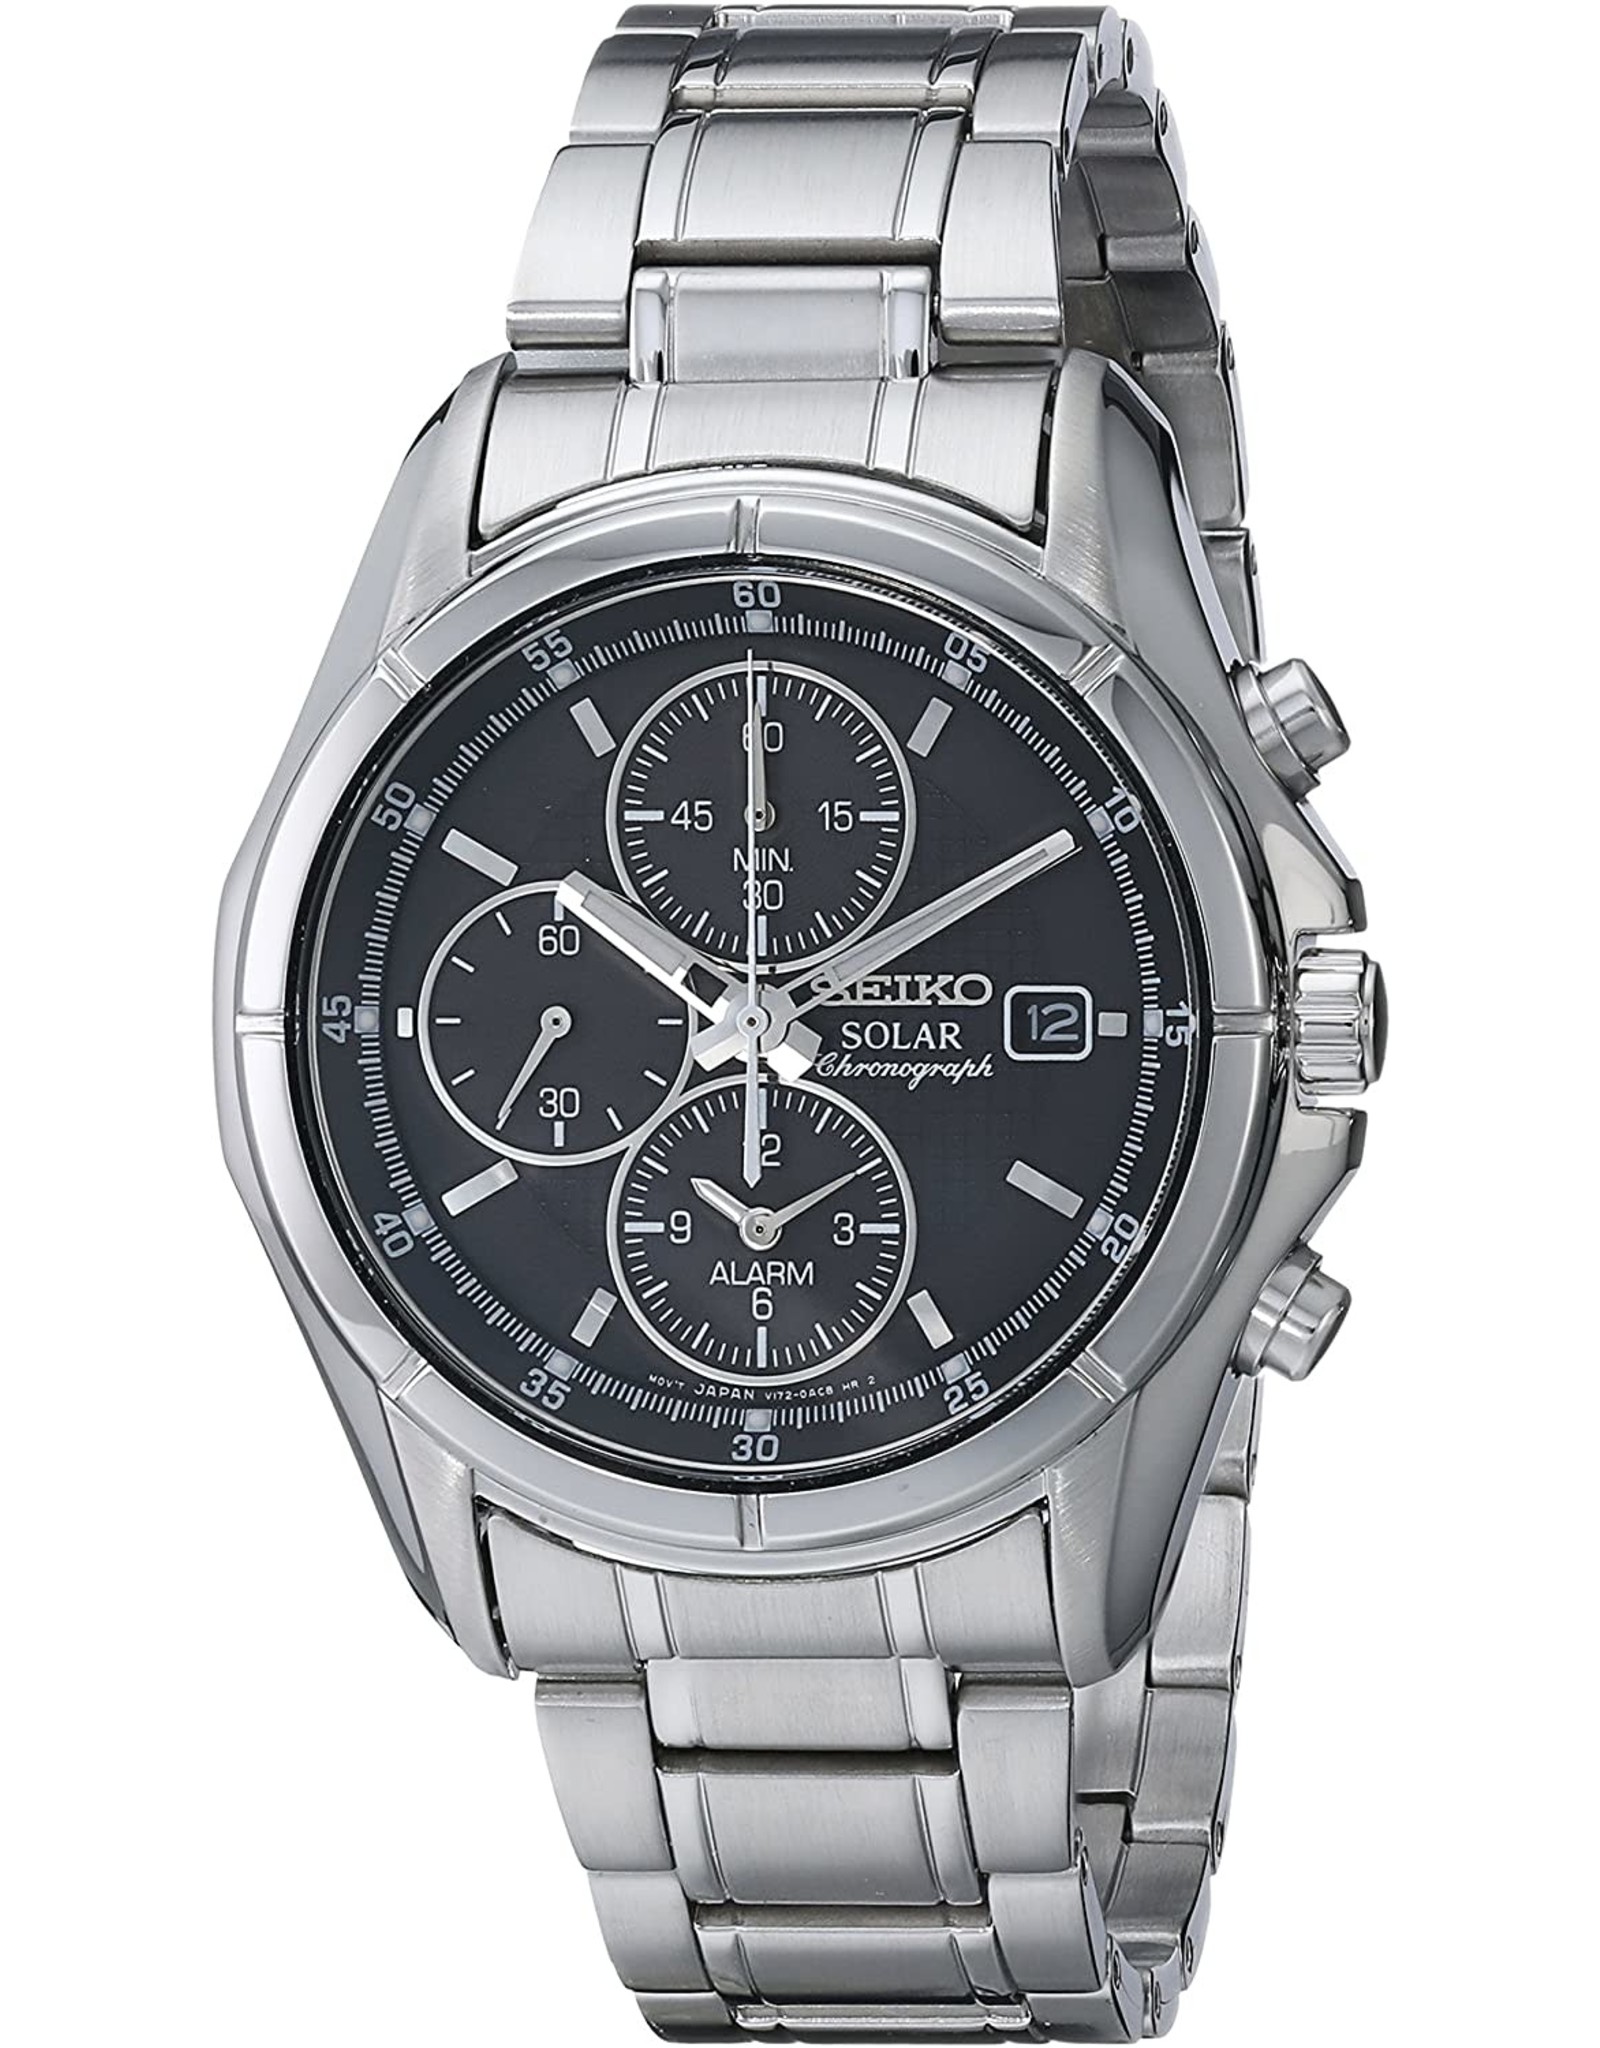 Mens Seiko Solar Chronograph Watch with Stainless Steel Band, 39mm - Snow's  Jewelers Miami Lakes